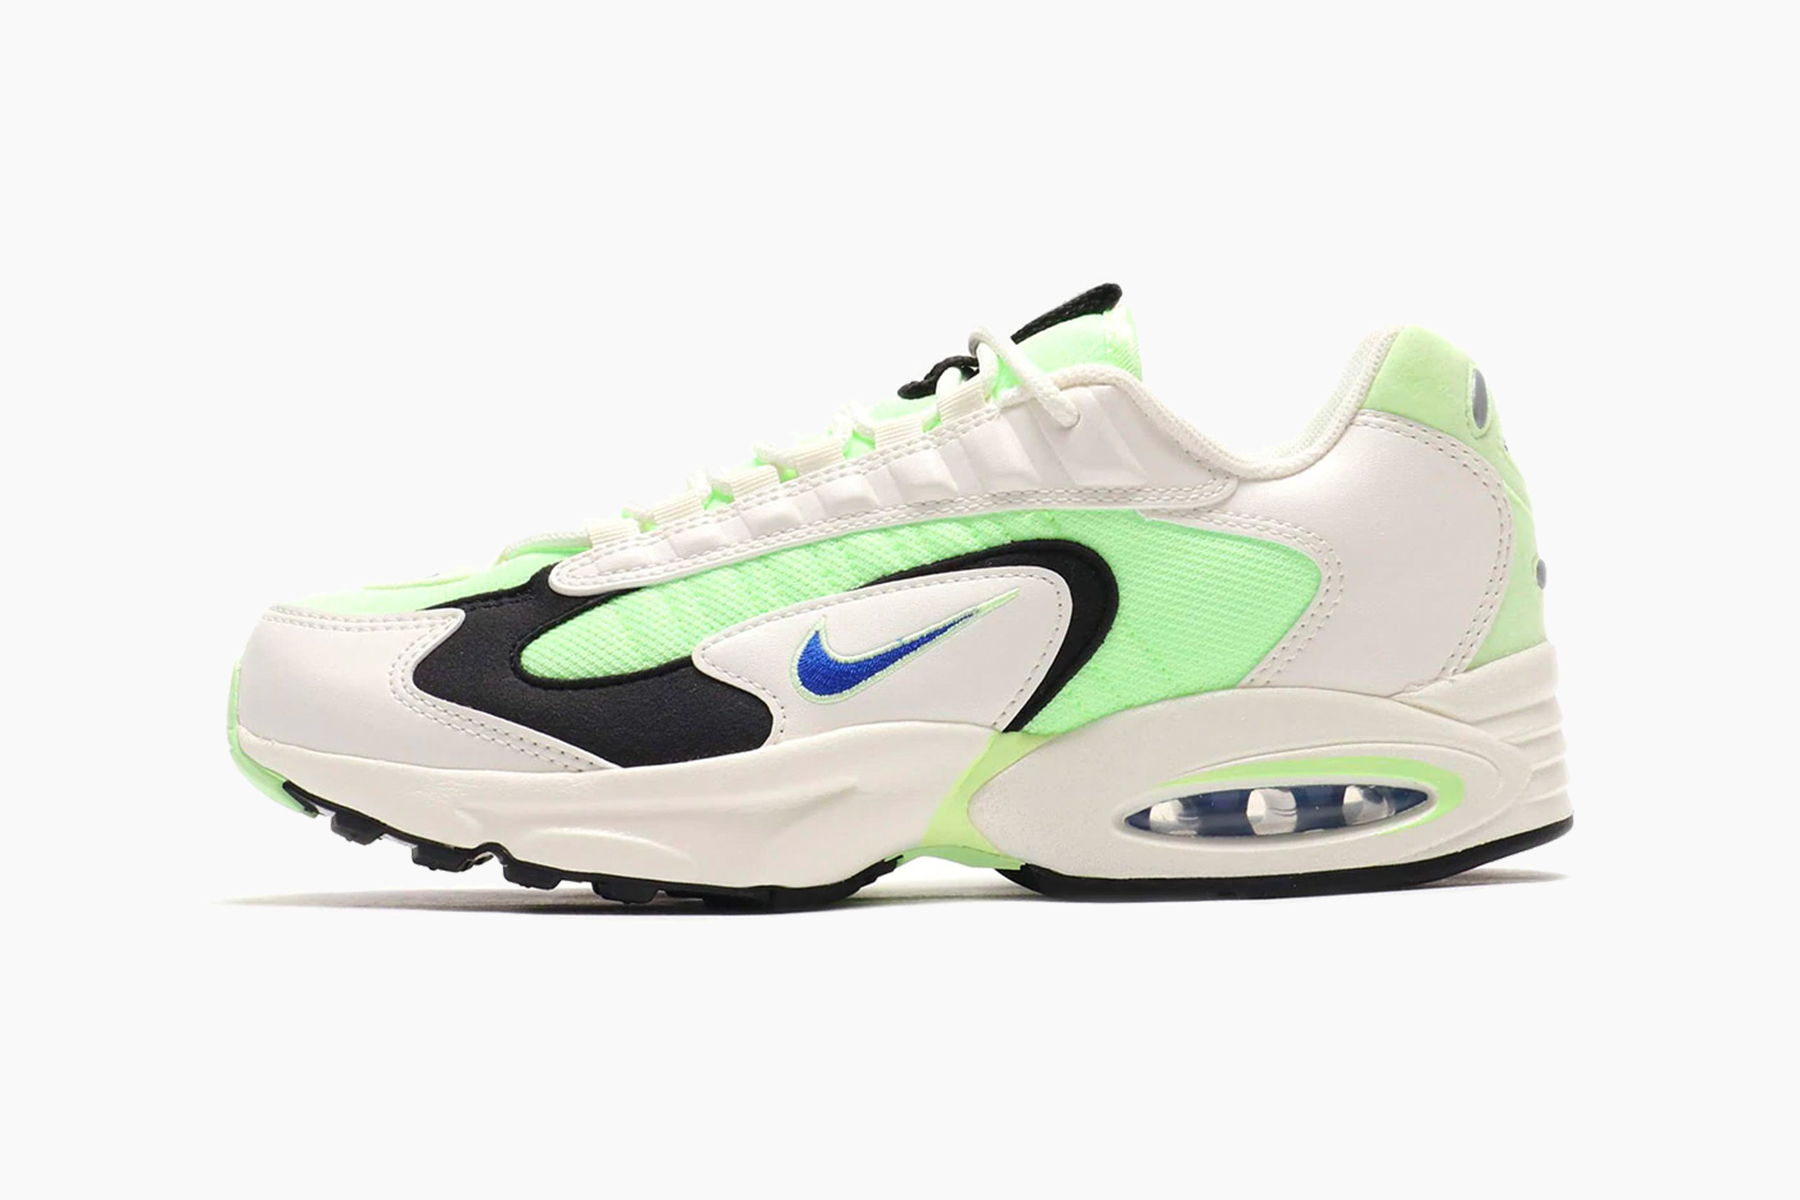 Nike Embellishes Air Max Triax With Light Volt Highlights